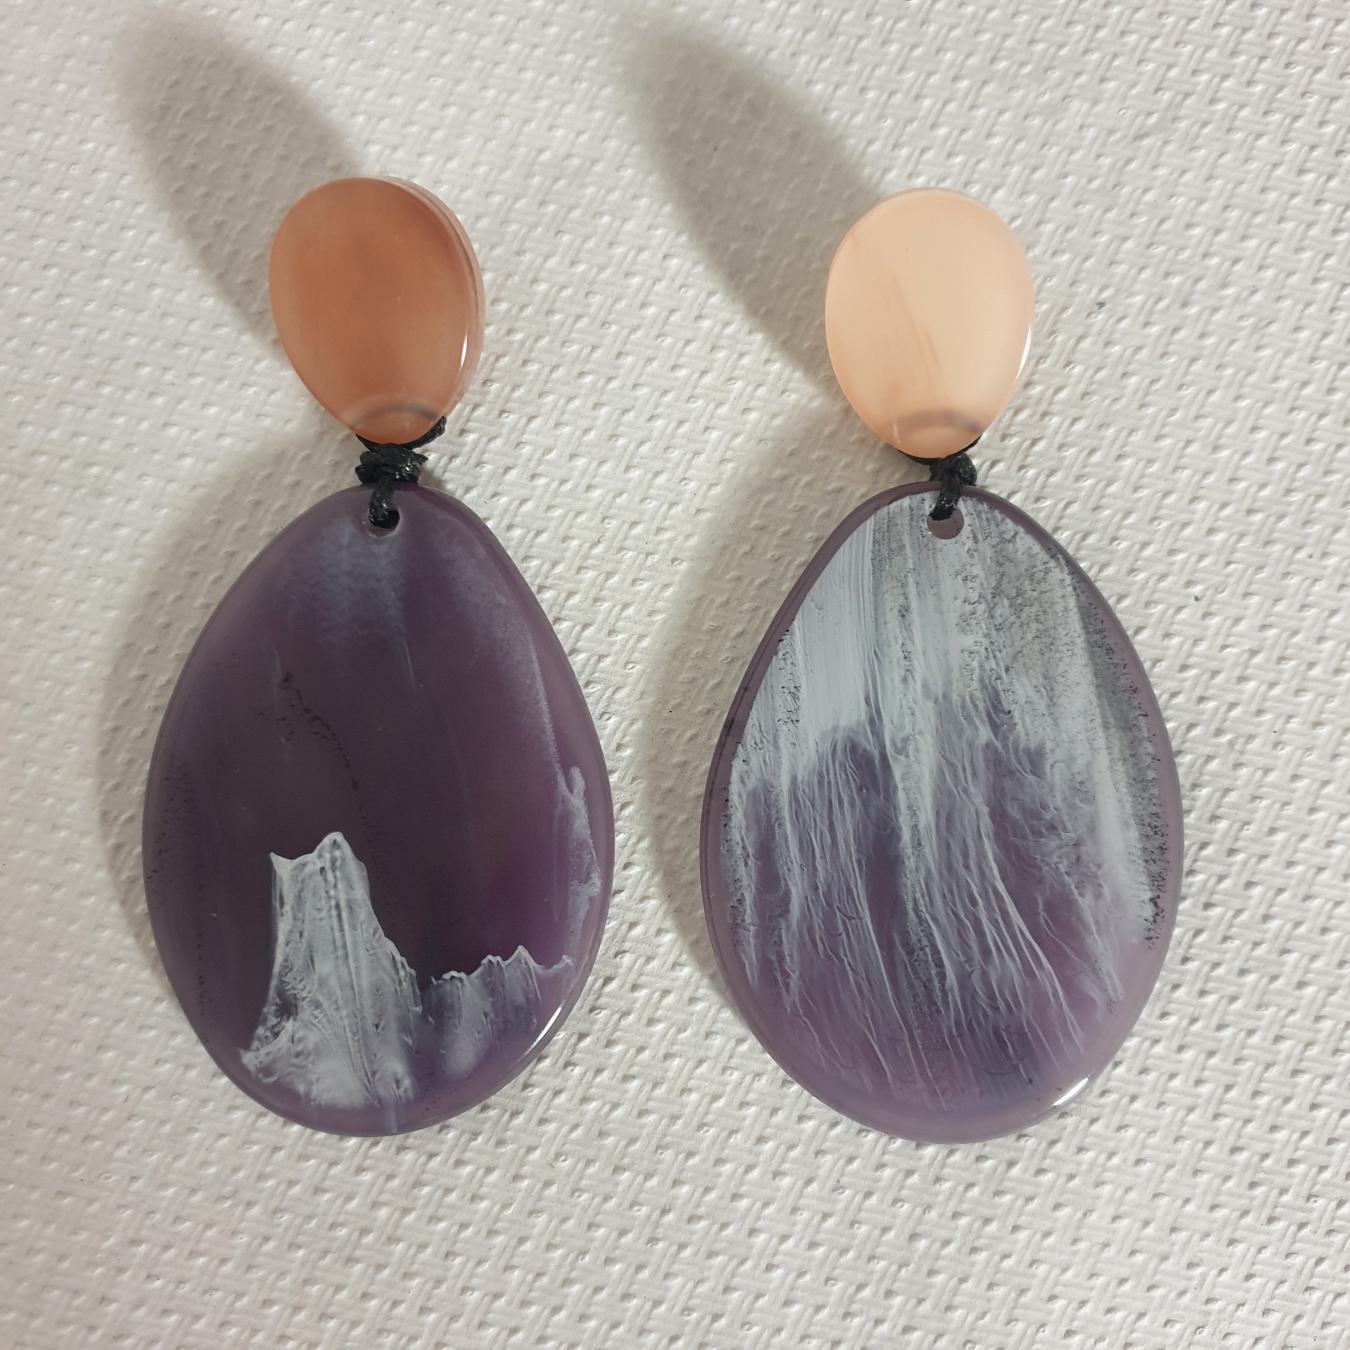 Pair of pale pink and purple Bakelite Mid Century drop earrings, France 1970s.
Some white veins on the purple/grey Bakelite pendants.
Never used.
Excellent condition.